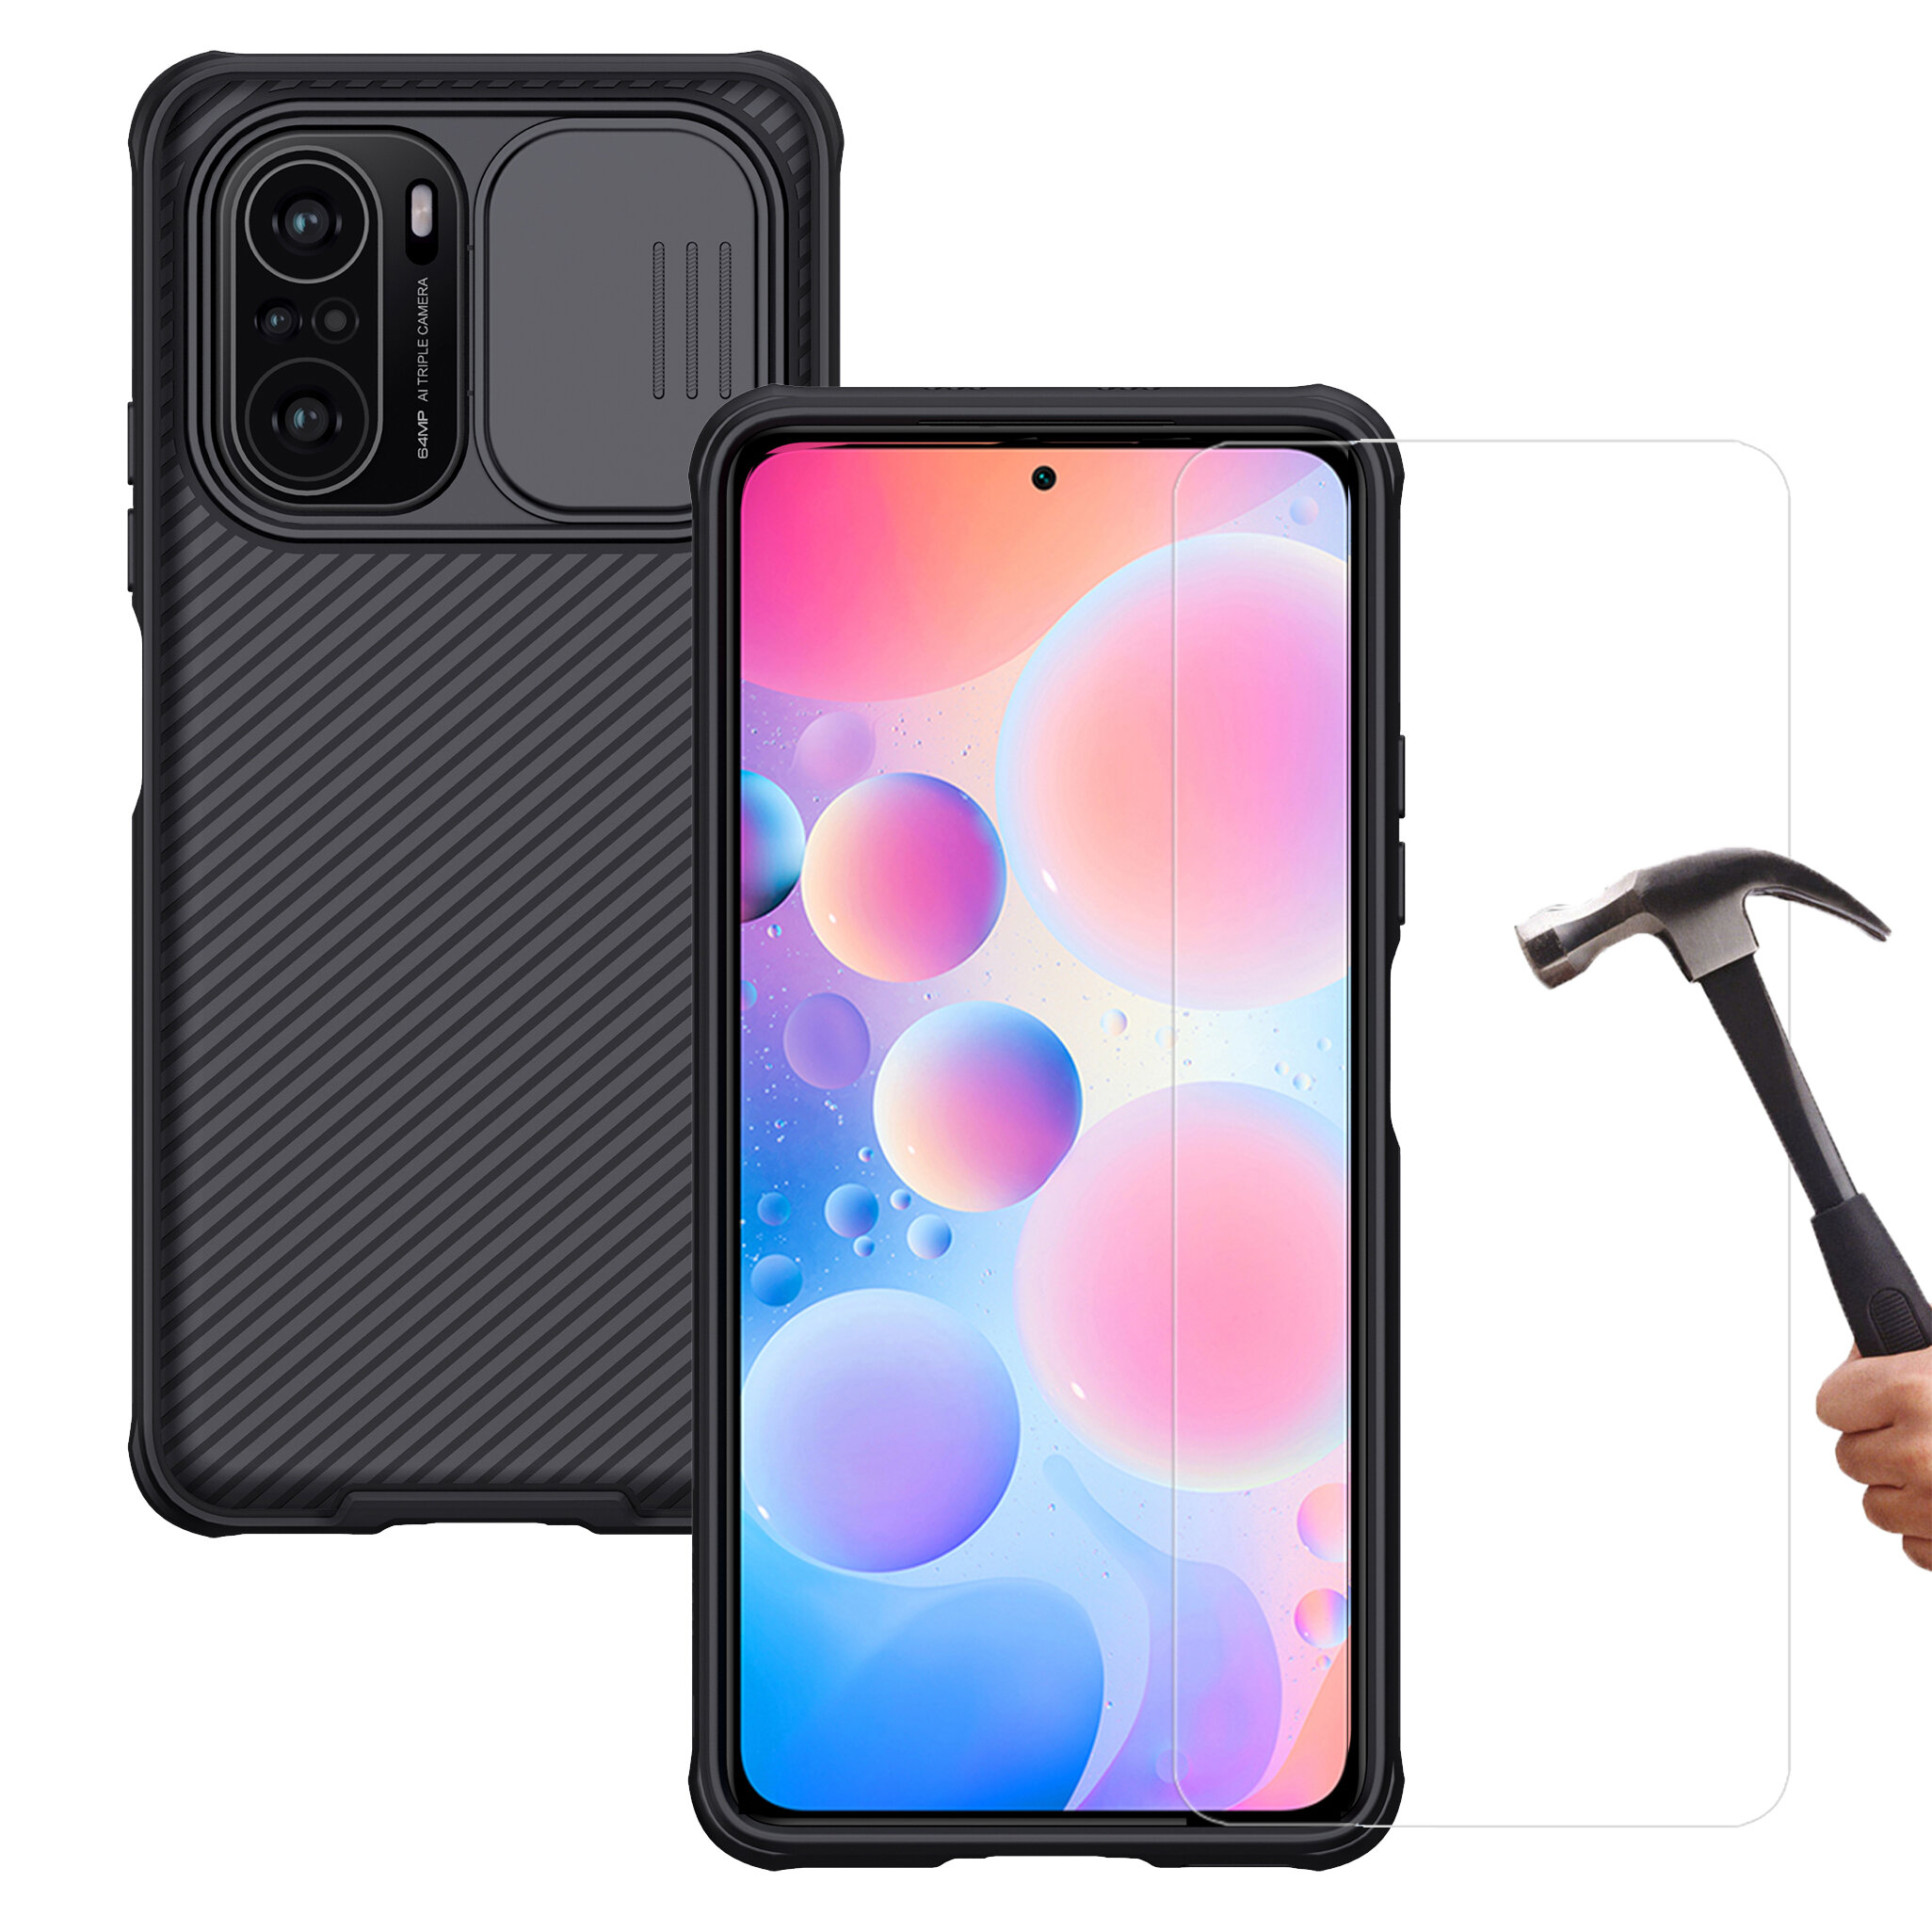 

NILLKIN for POCO F3 Global Version Accessories Set Amazing H+PRO 9H Anti-Explosion Tempered Glass Screen Protector + Bum